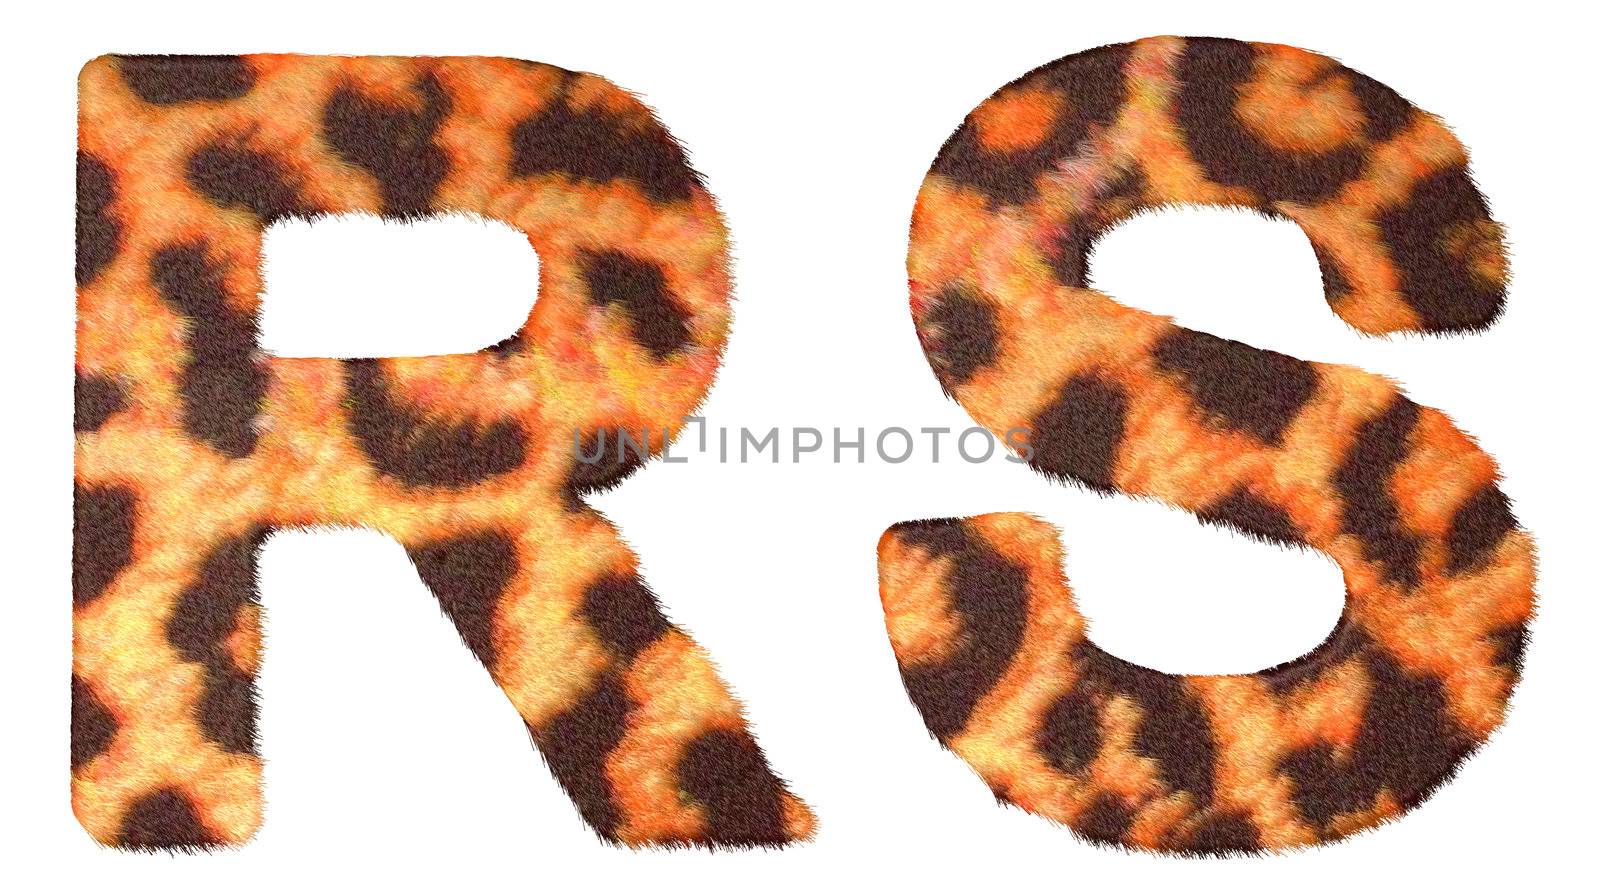 Leopard fur R and S letters isolated over white background